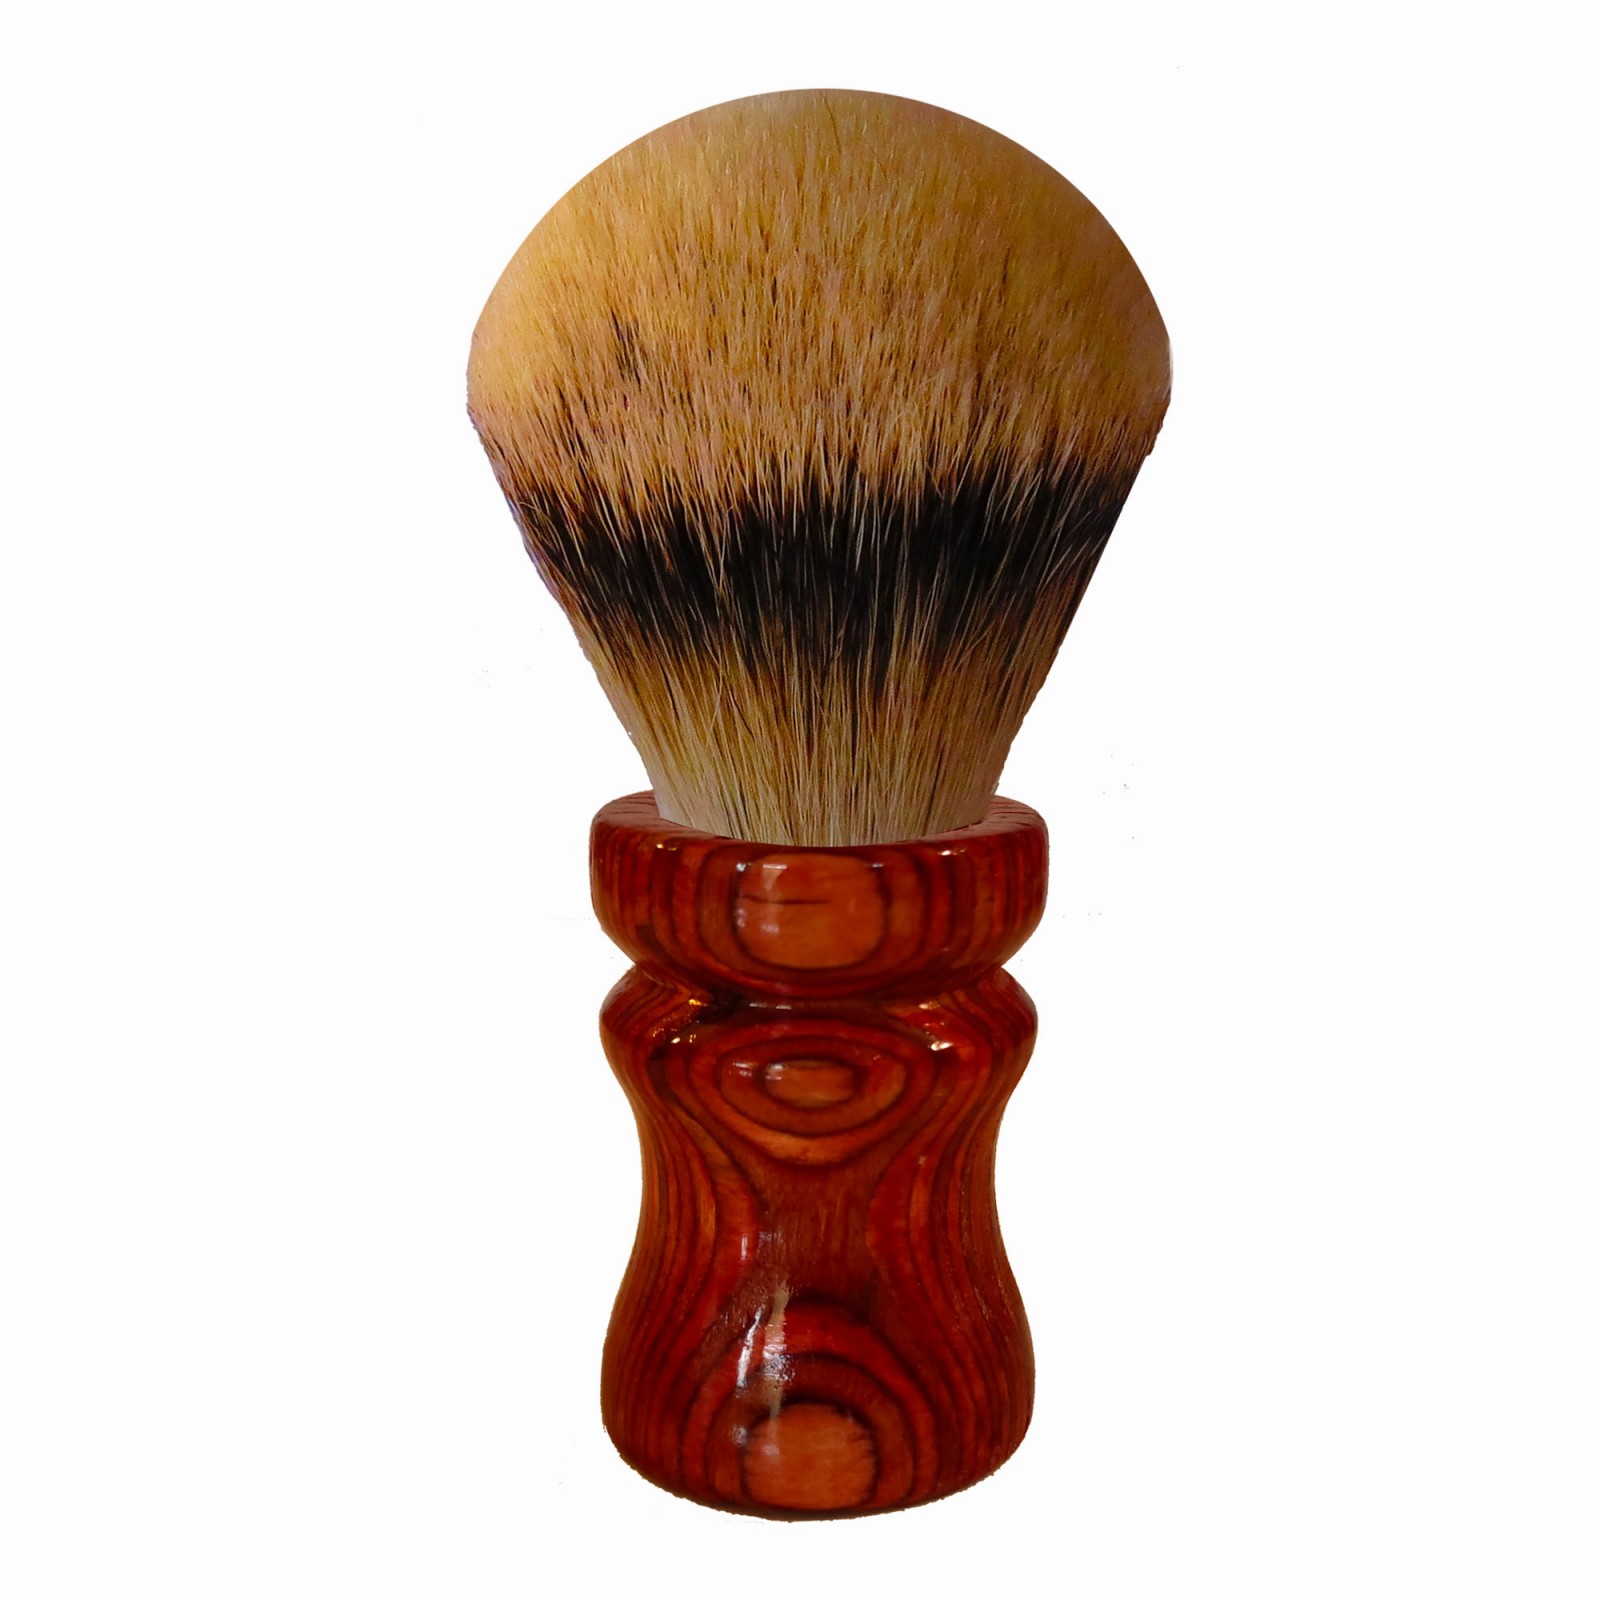 Wooden shaving brush with silvertip 30mm knot